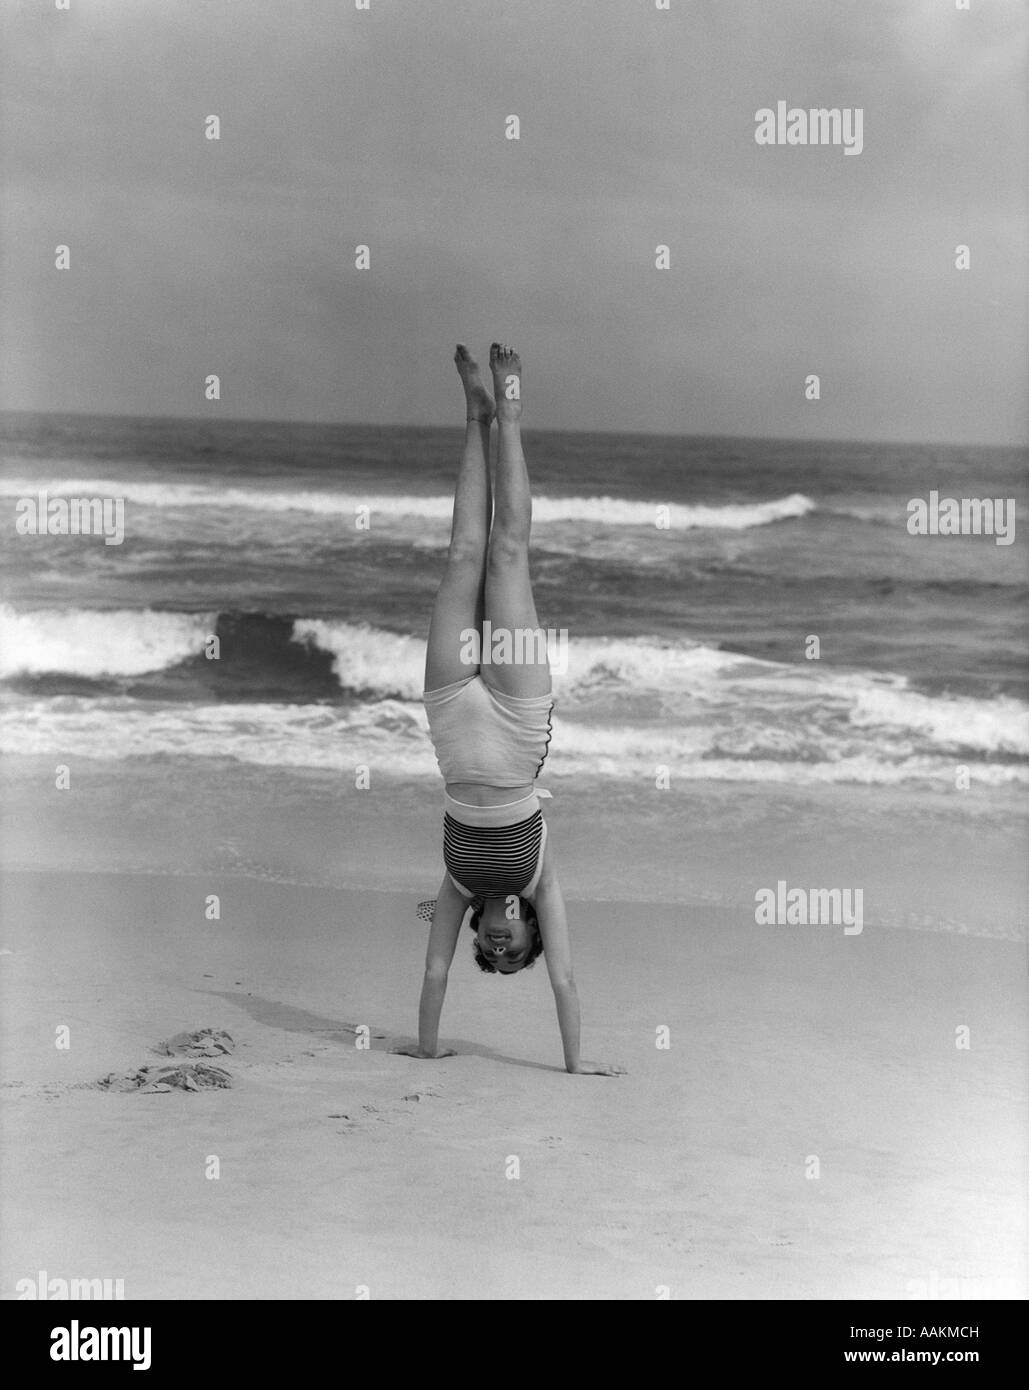 1930s WOMAN DOING HANDSTAND ON BEACH UPSIDE DOWN EXERCISE Stock Photo